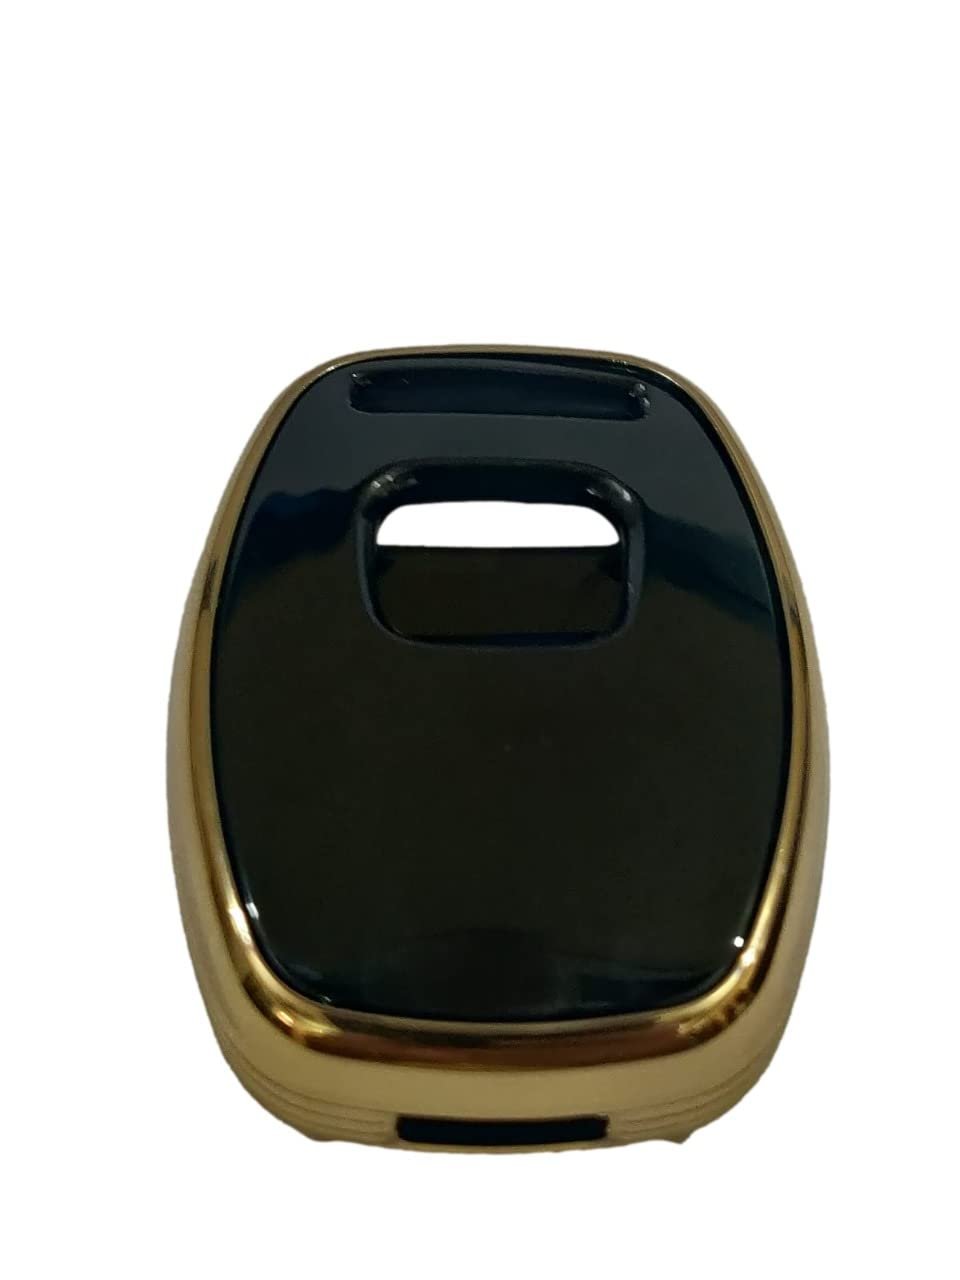 TPU Key Cover For Compatible With City, CIvic, Jazz, Brio, Amaze 2 Button Remote Key (Black)  Image 